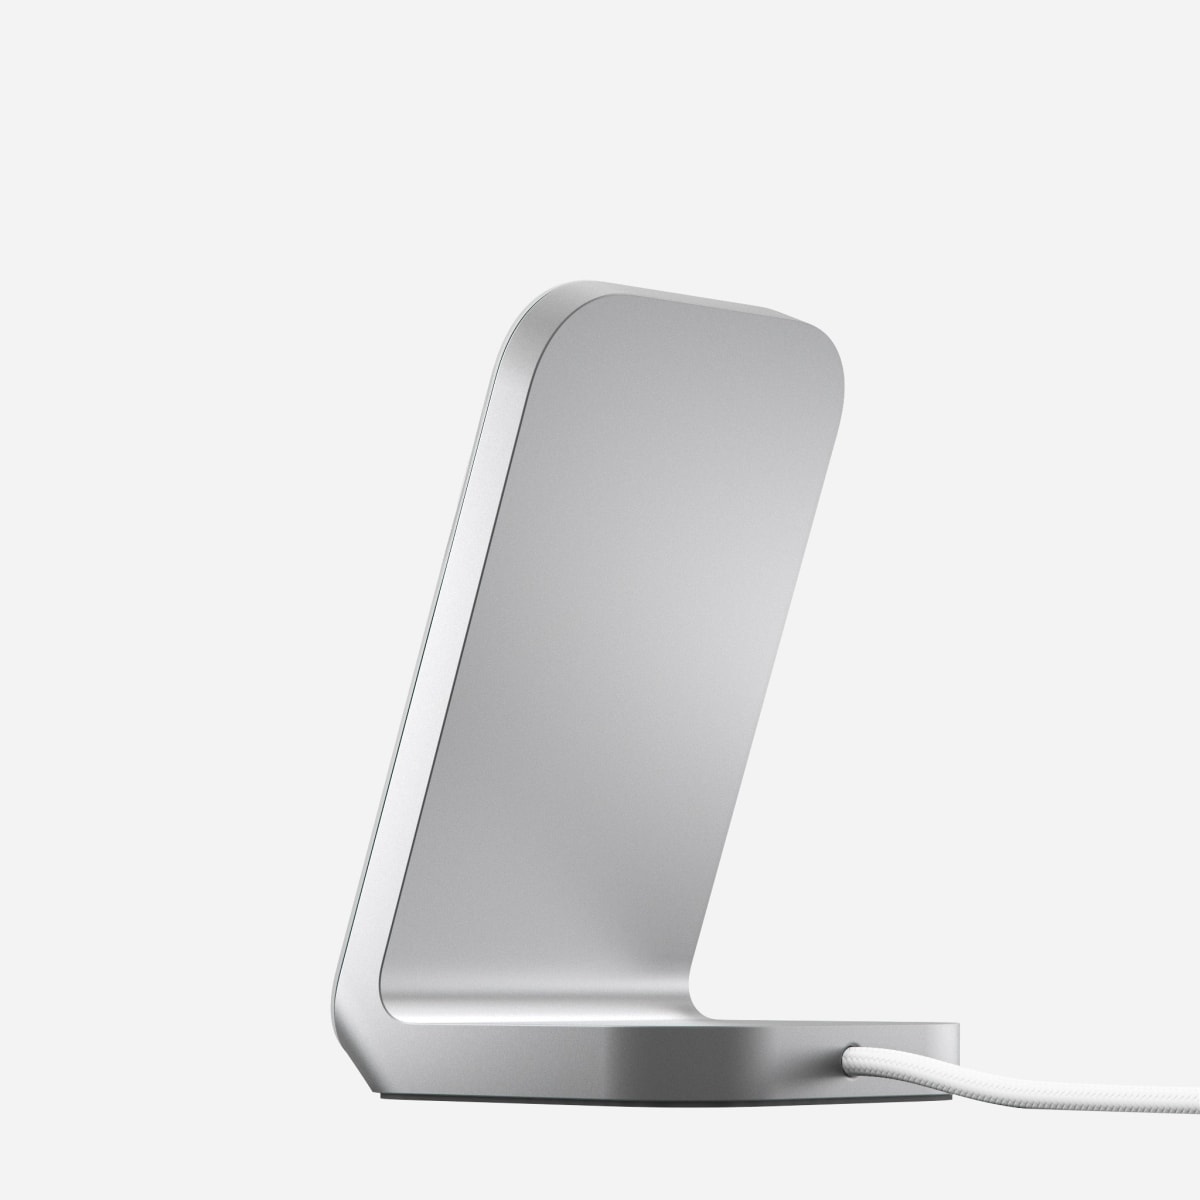 Stand One MagSafe Charger